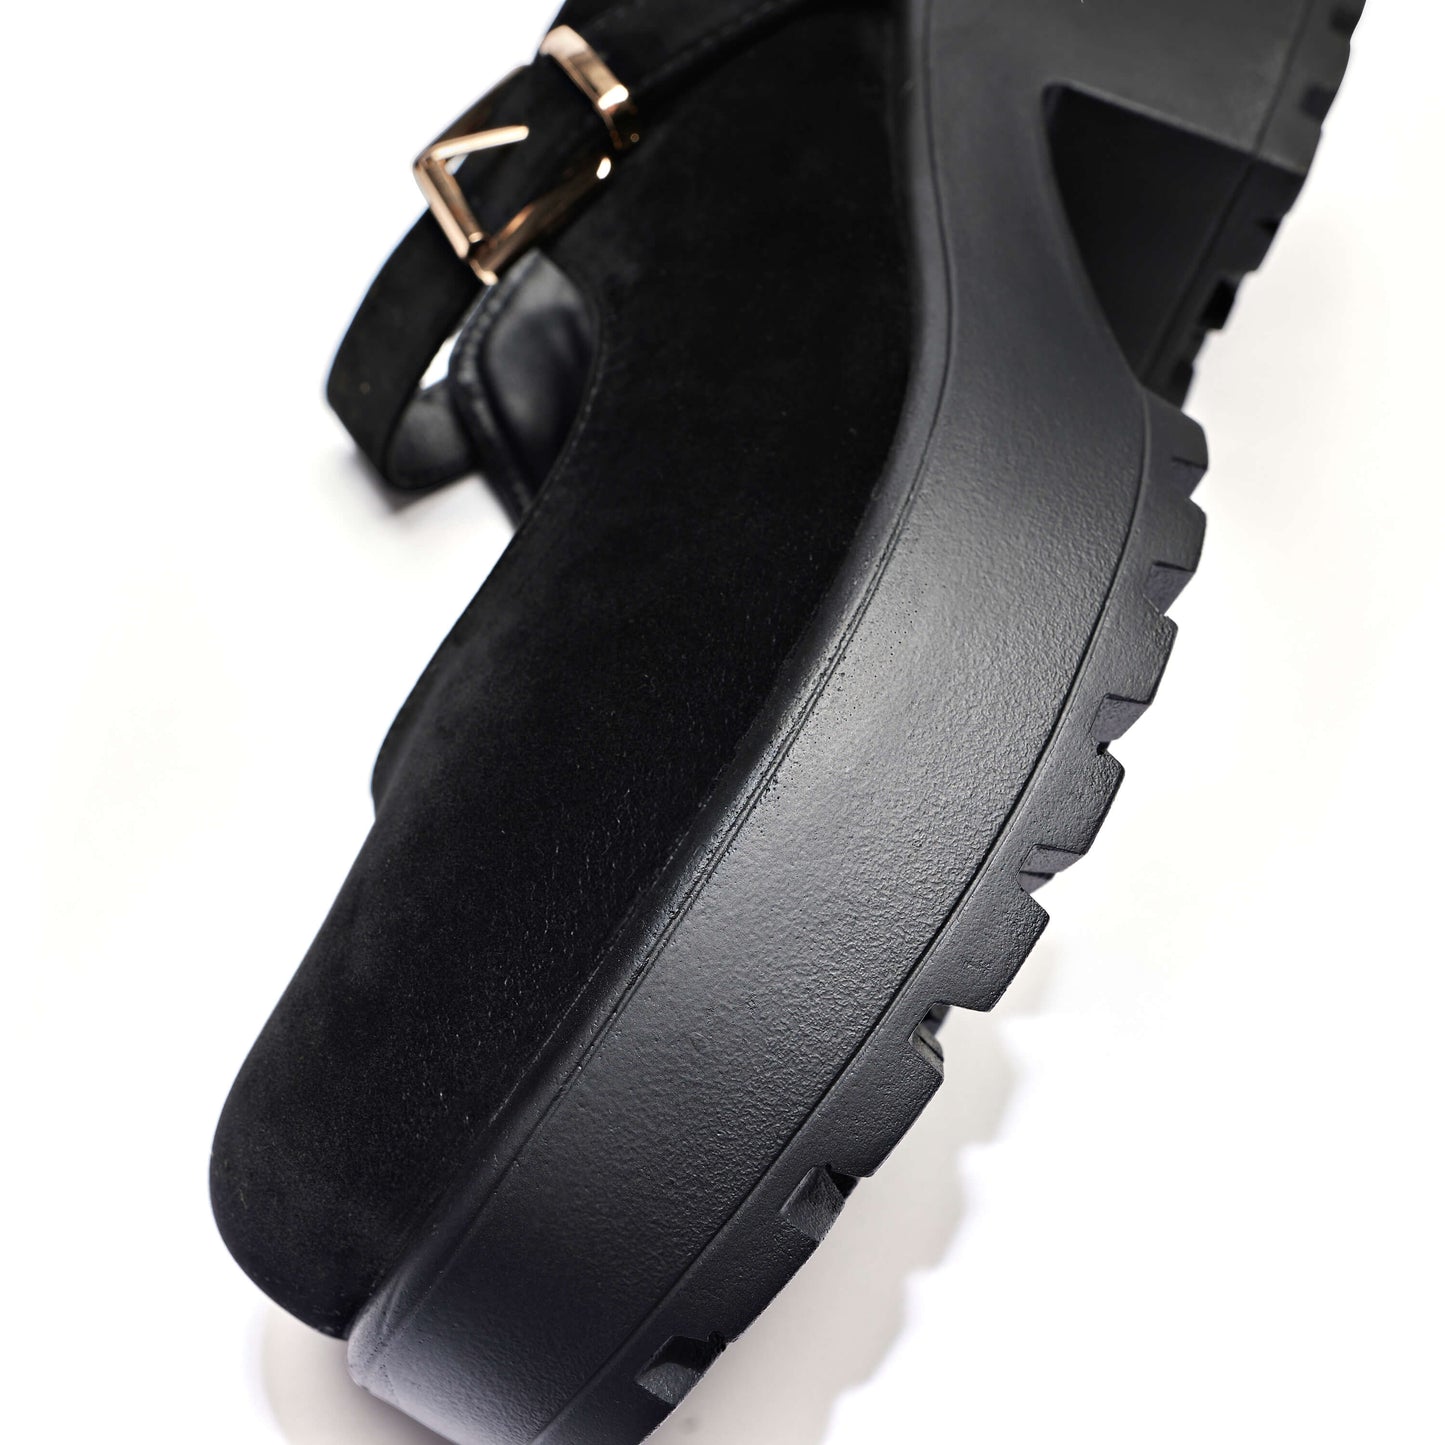 TIRA Black Mary Jane Shoes 'Suede Edition' - Mary Janes - KOI Footwear - Black Suede - Platform Detail